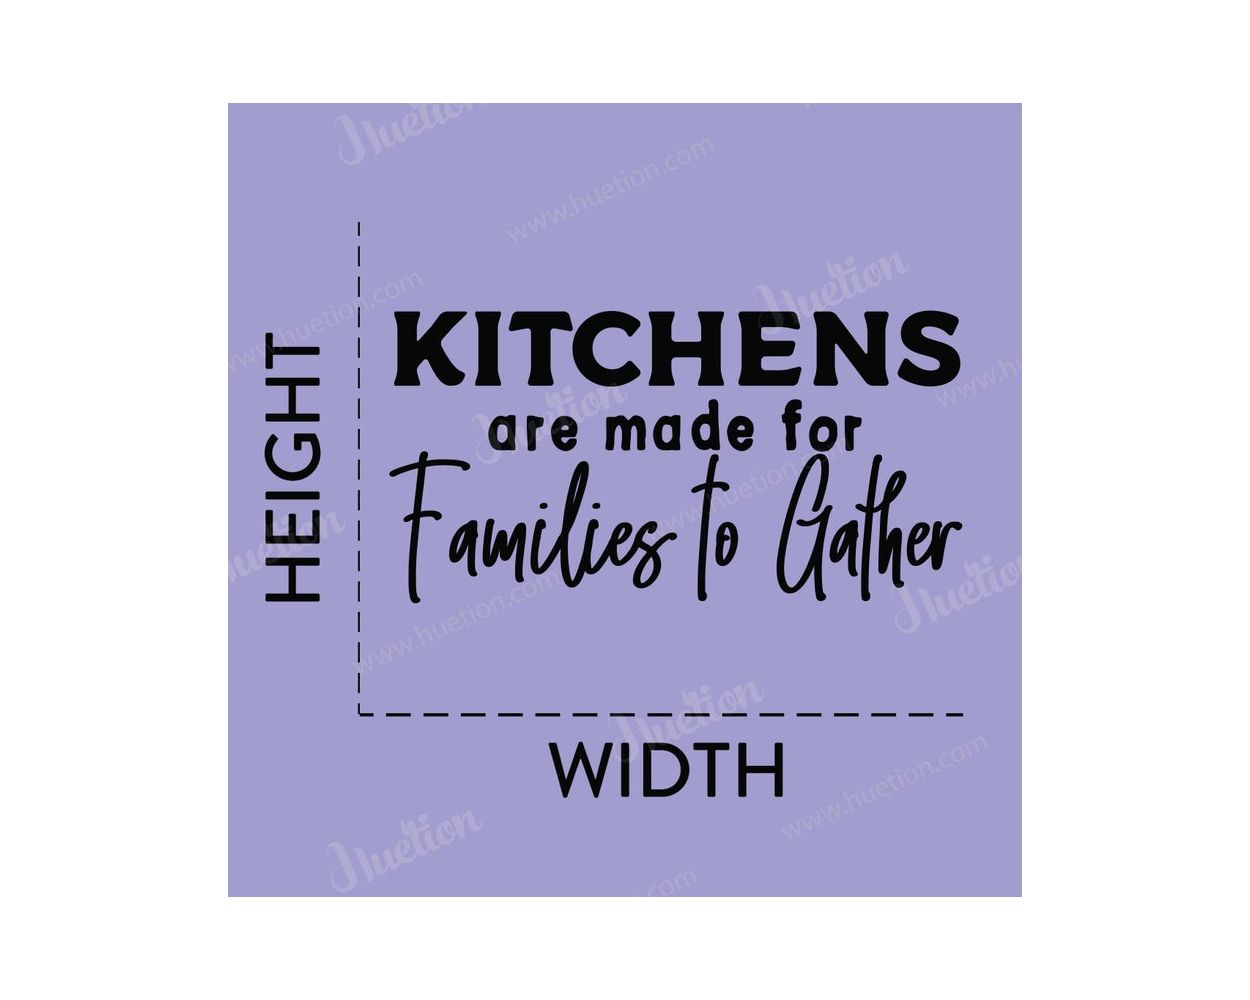 Kitchen Quote Wall Stickers For Home Kitchen Wall Decor. shop now